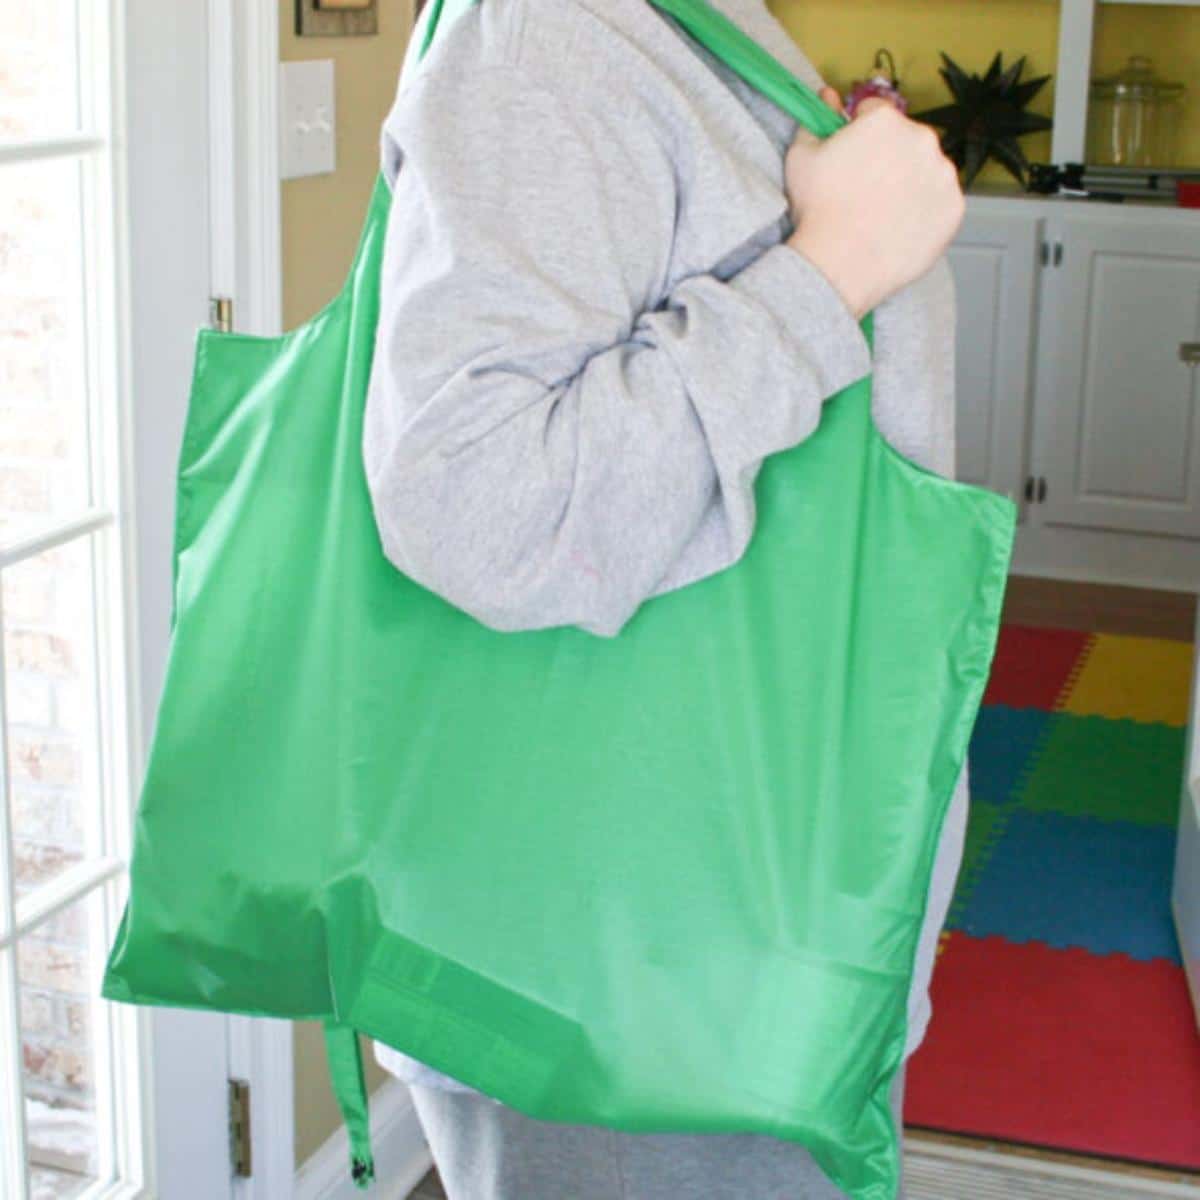 DIY Foldable Reusable Shopping Bag carried by a woman.